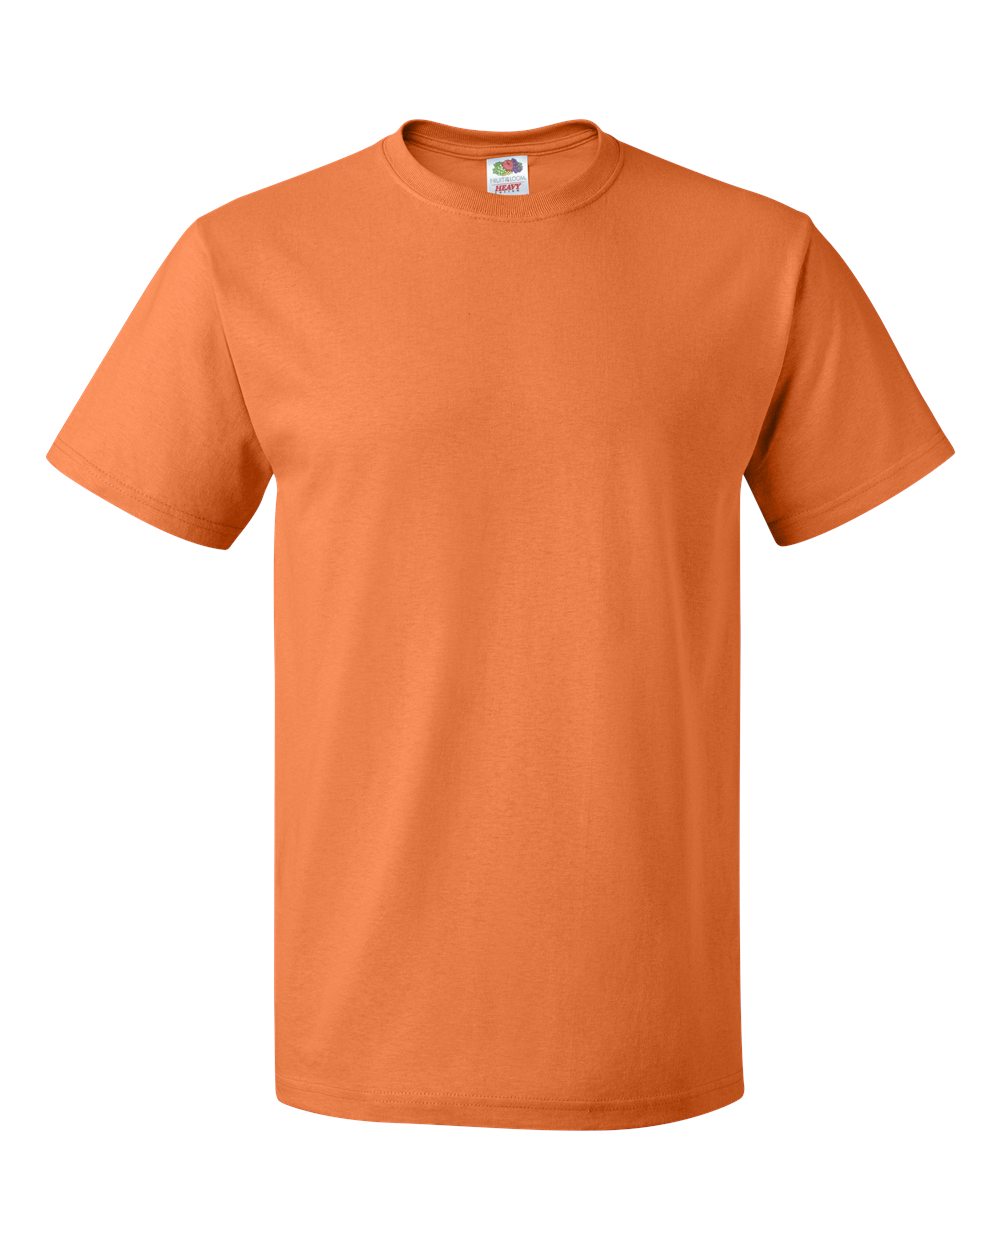 click to view Tennessee Orange